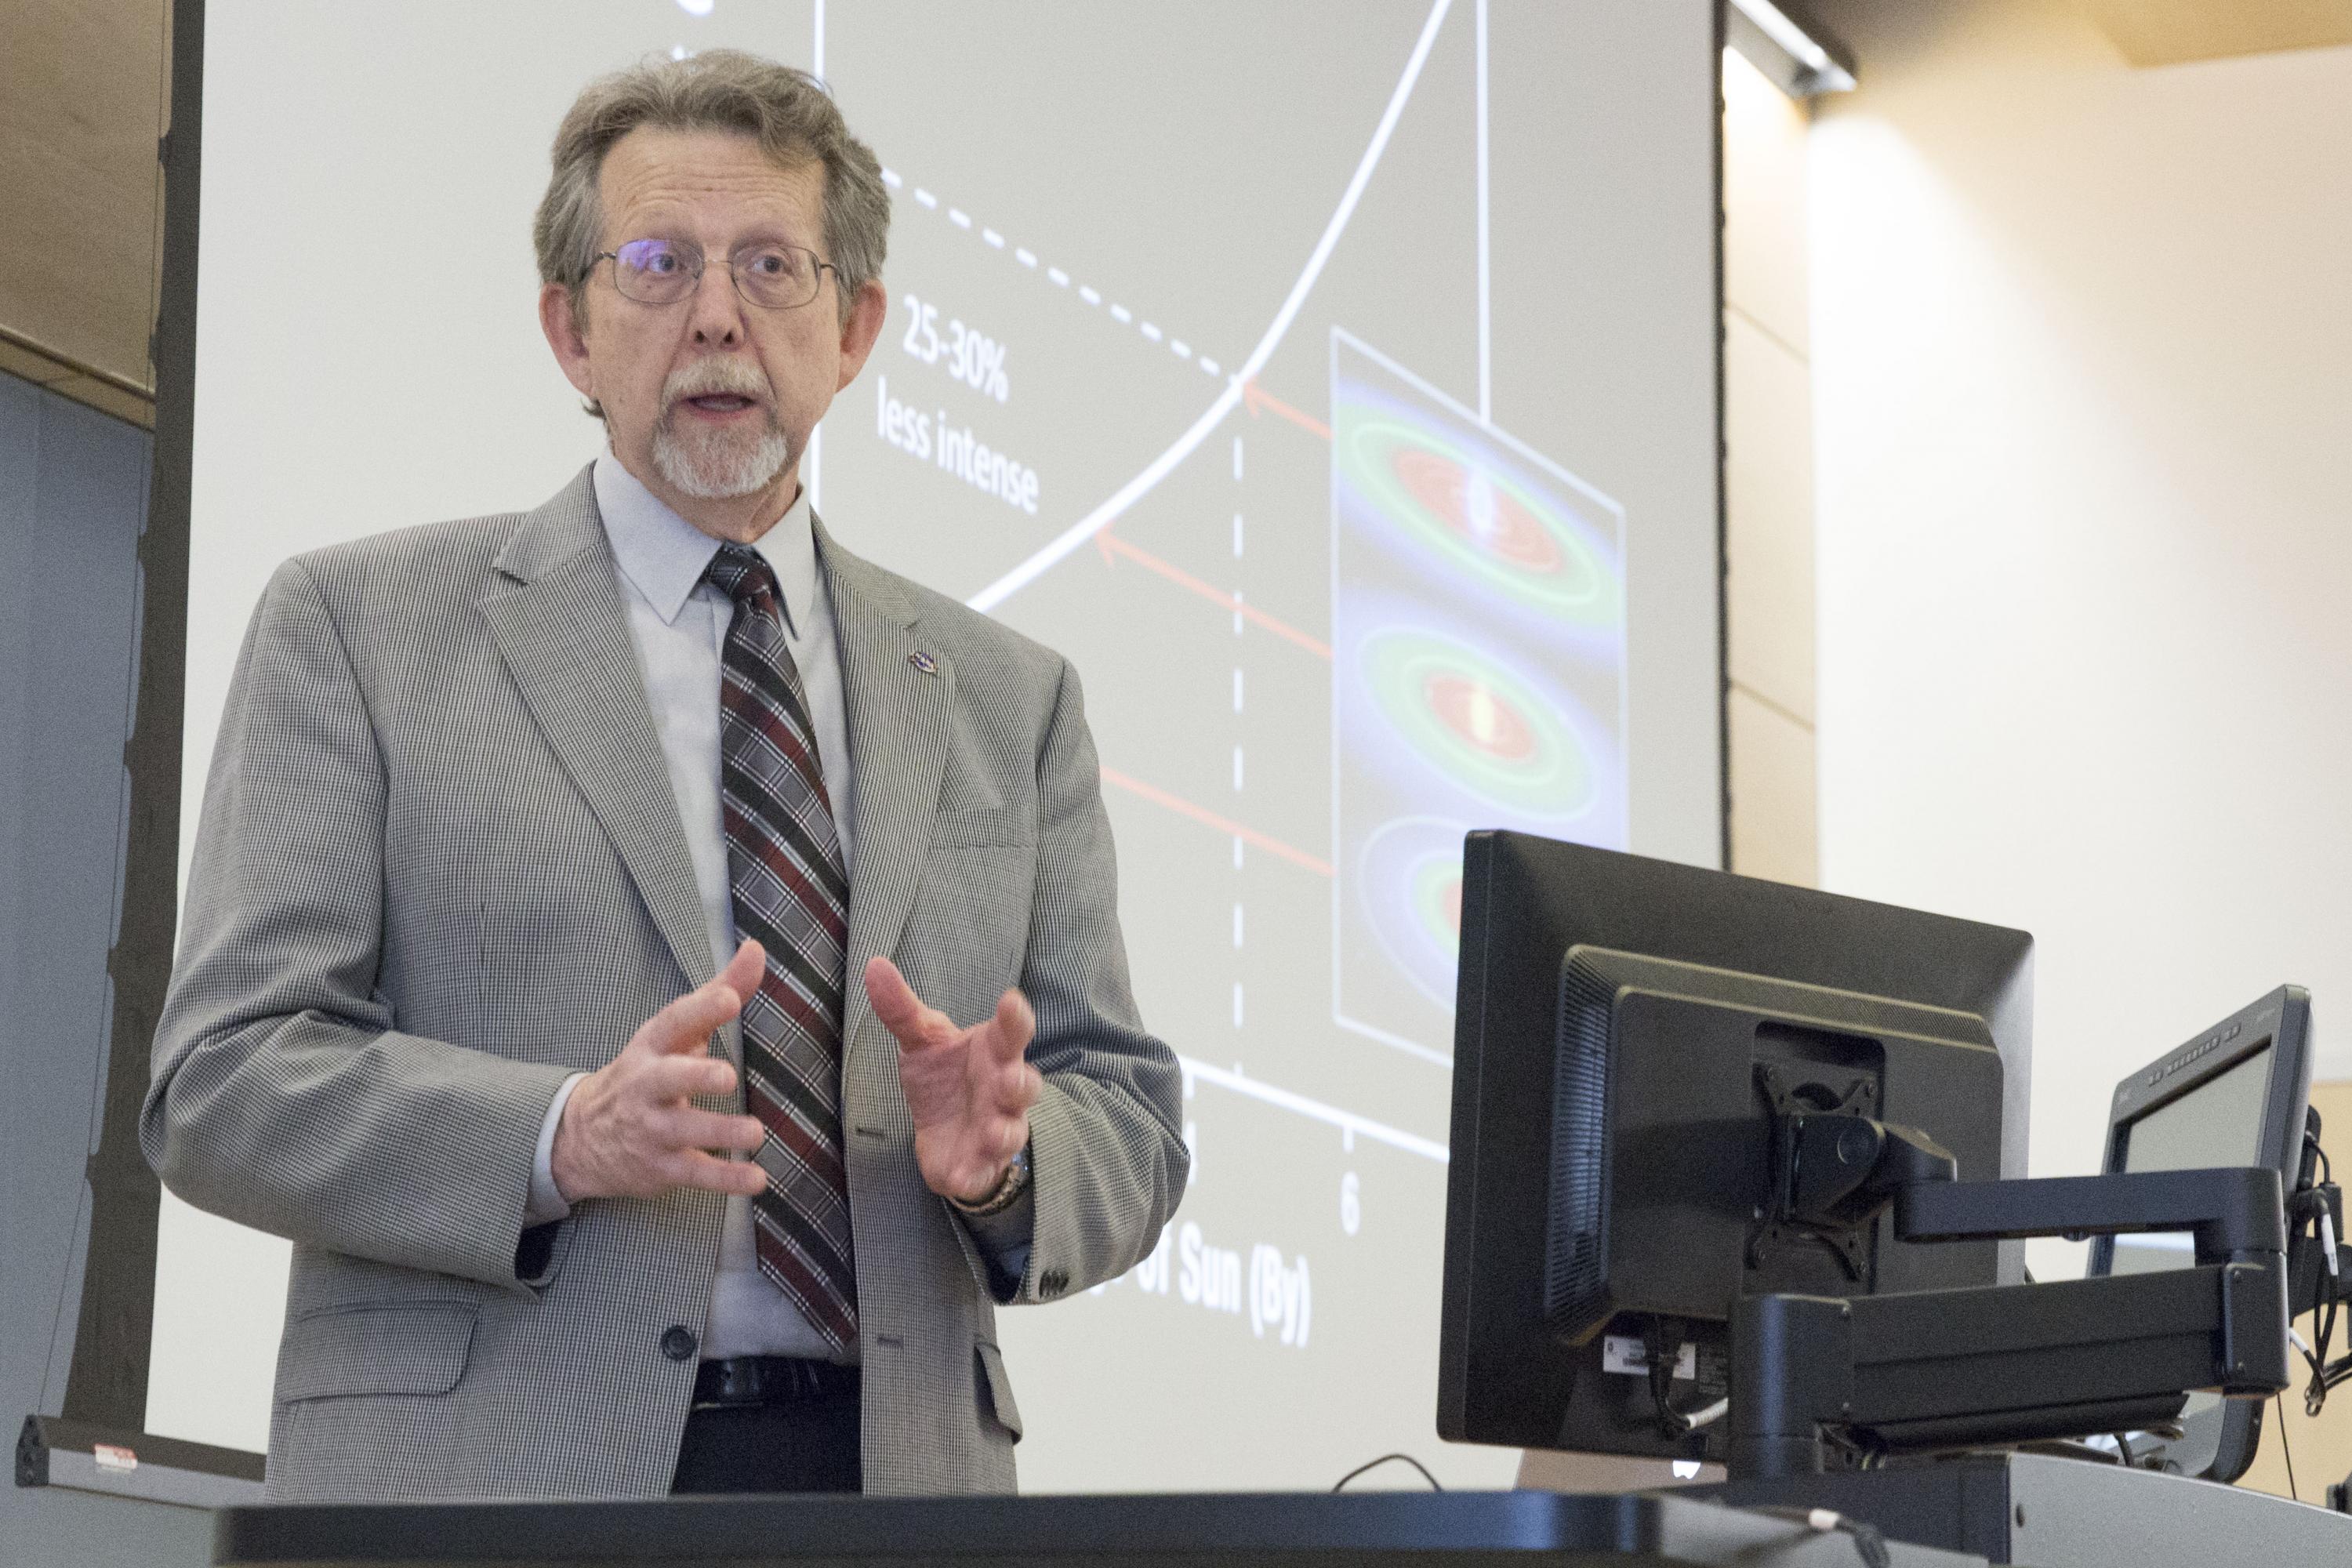 James Green, director of NASA’s Planetary Sciences Division, speaks at Georgia Tech on February 20, 2017.